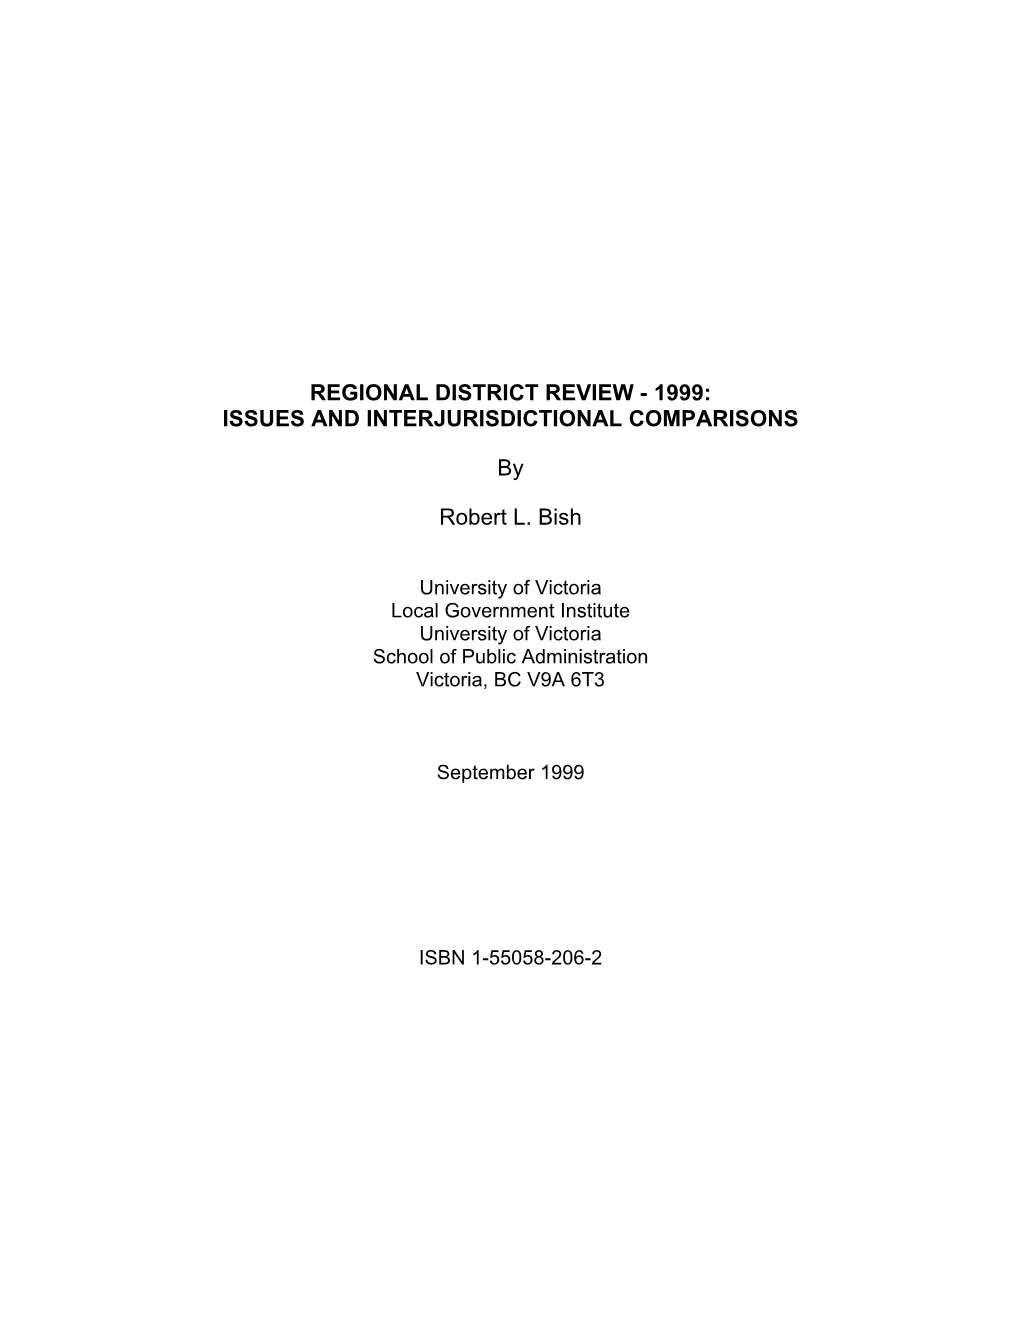 Regional District Review - 1999: Issues and Interjurisdictional Comparisons